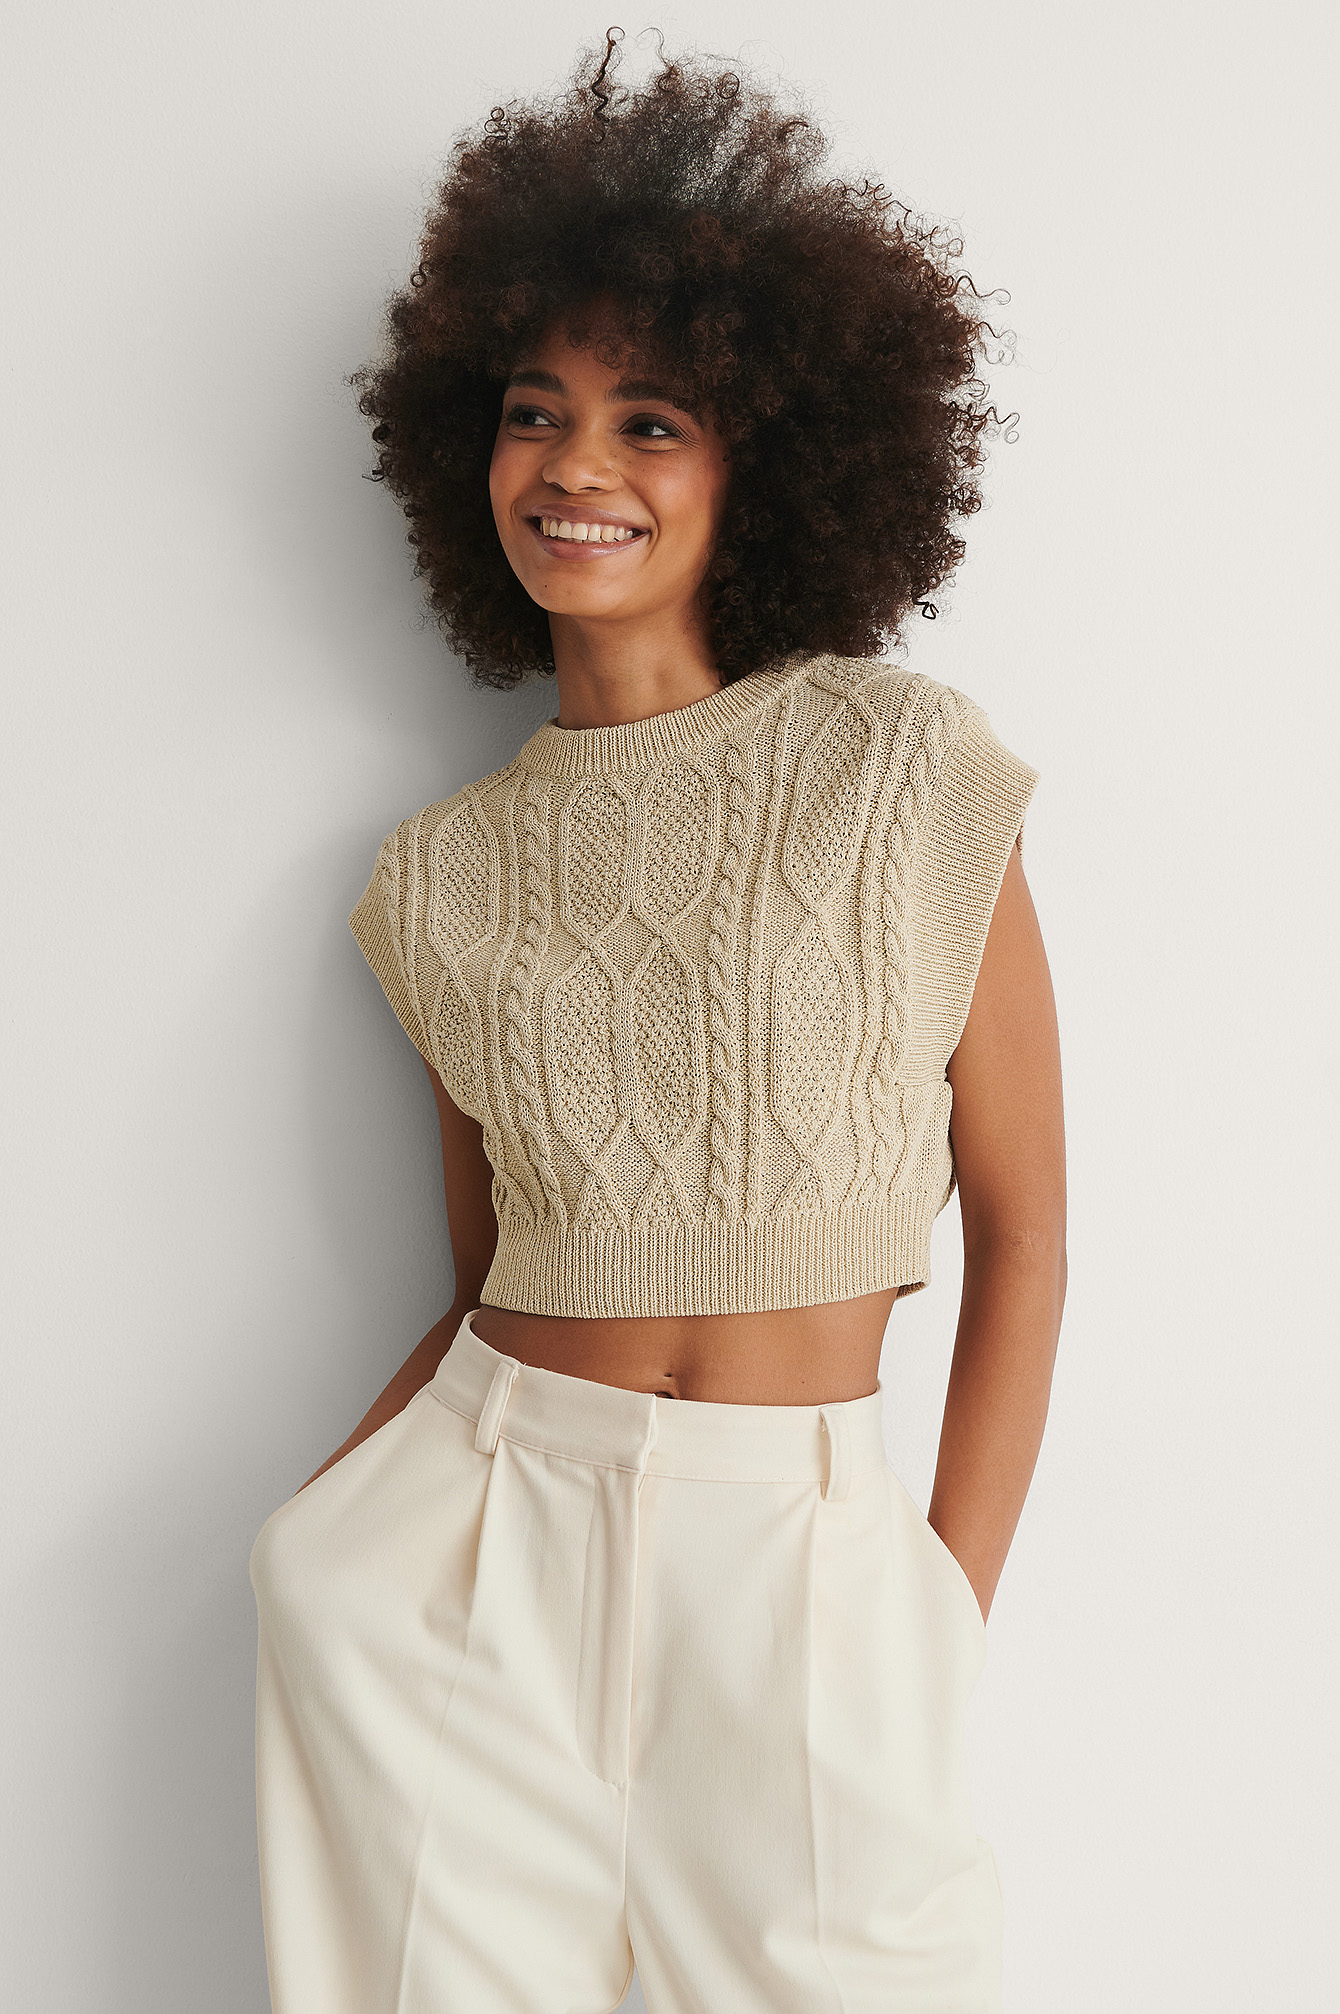 https://www.na-kd.com/globalassets/nakd_cable_knitted_cropped_vest_1018-007384-0005_01a.jpg?ref=A6025B06DF